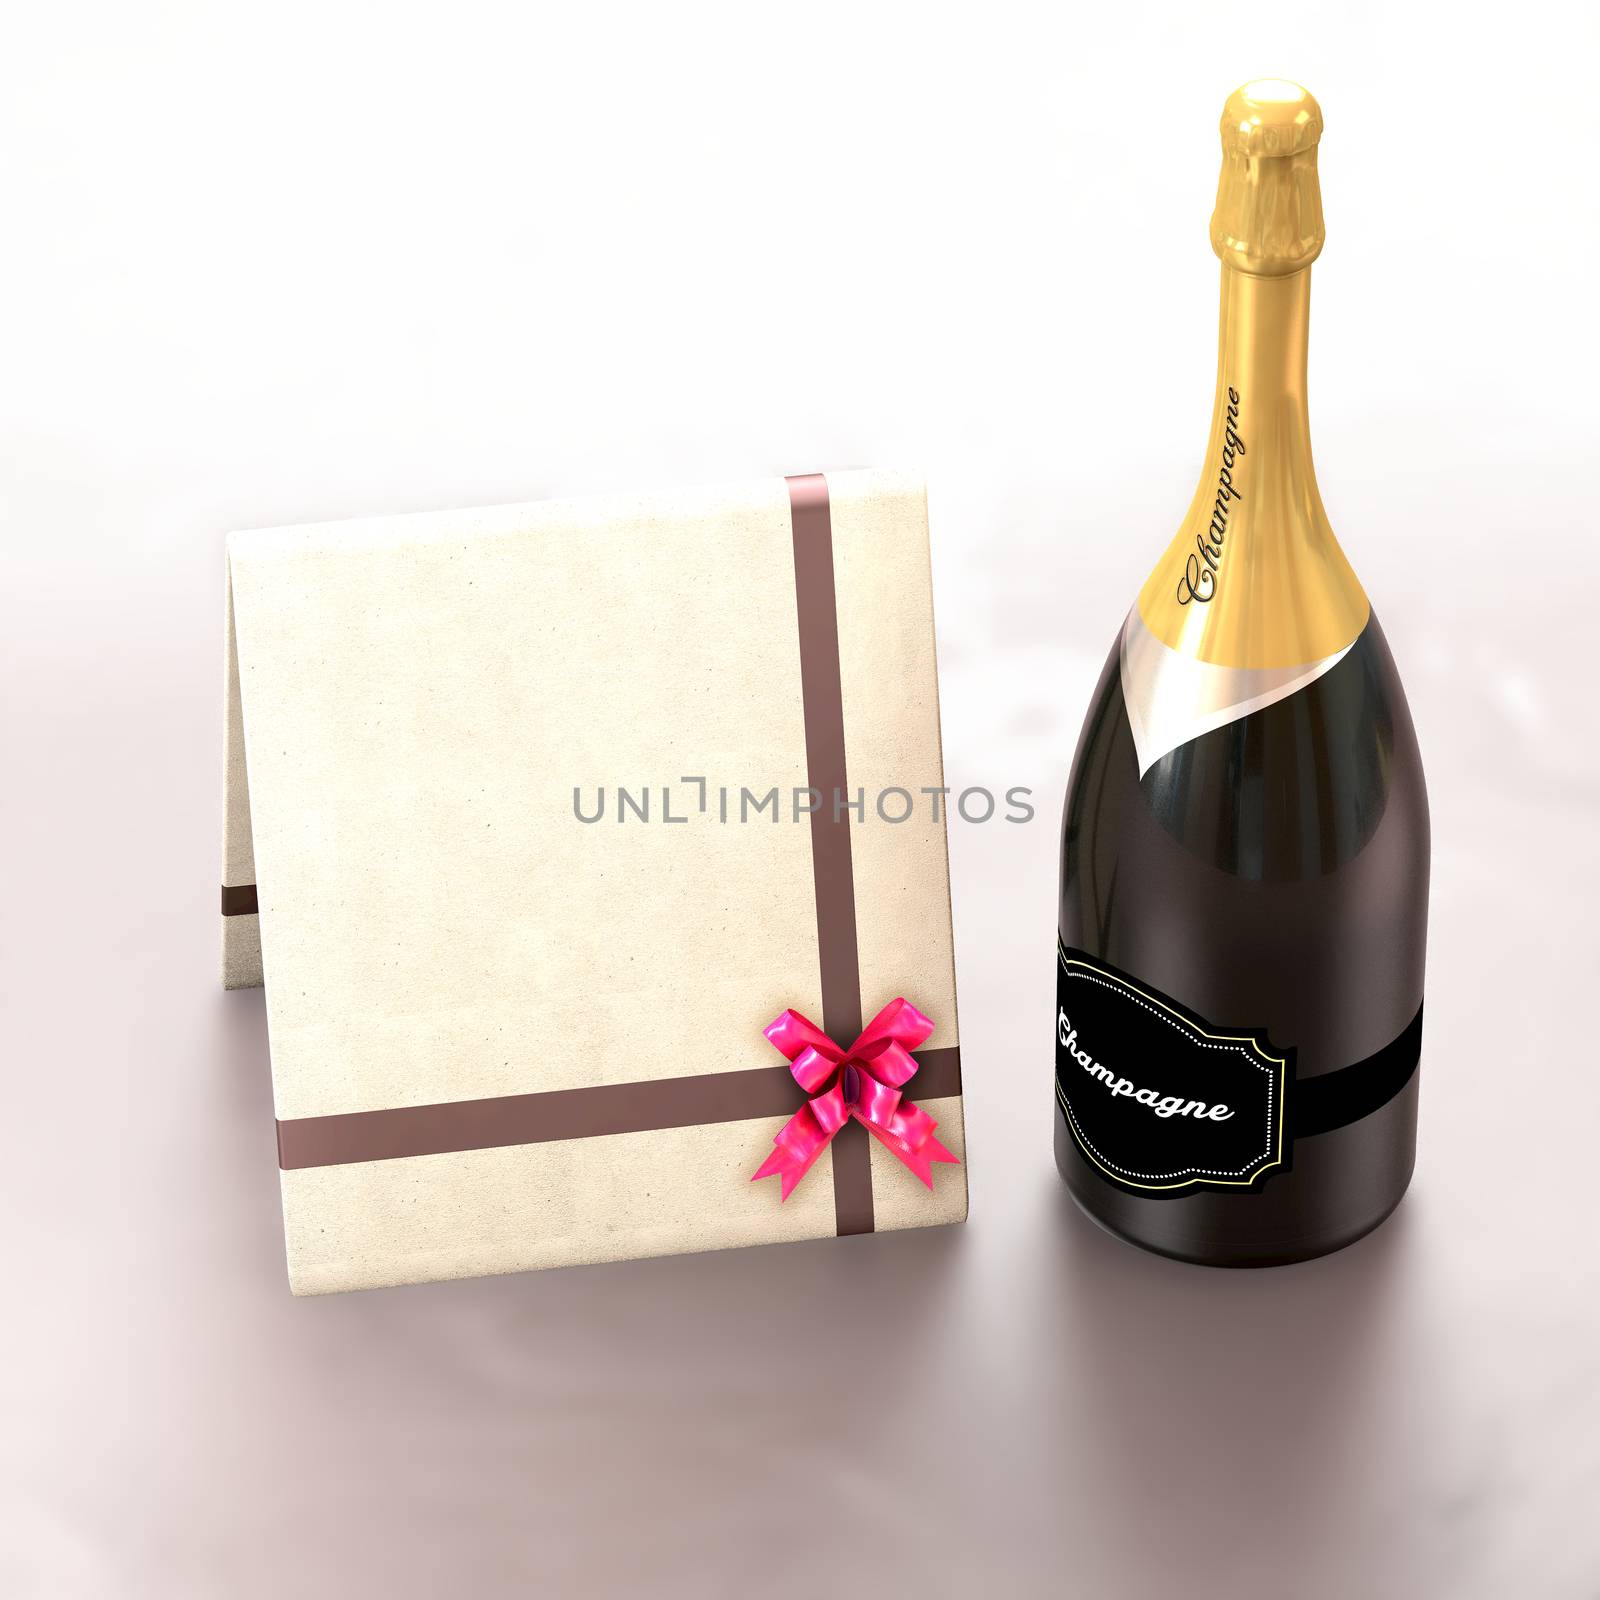 This illustration contains a champagne bottle and a greeting card with copy left to express wish.